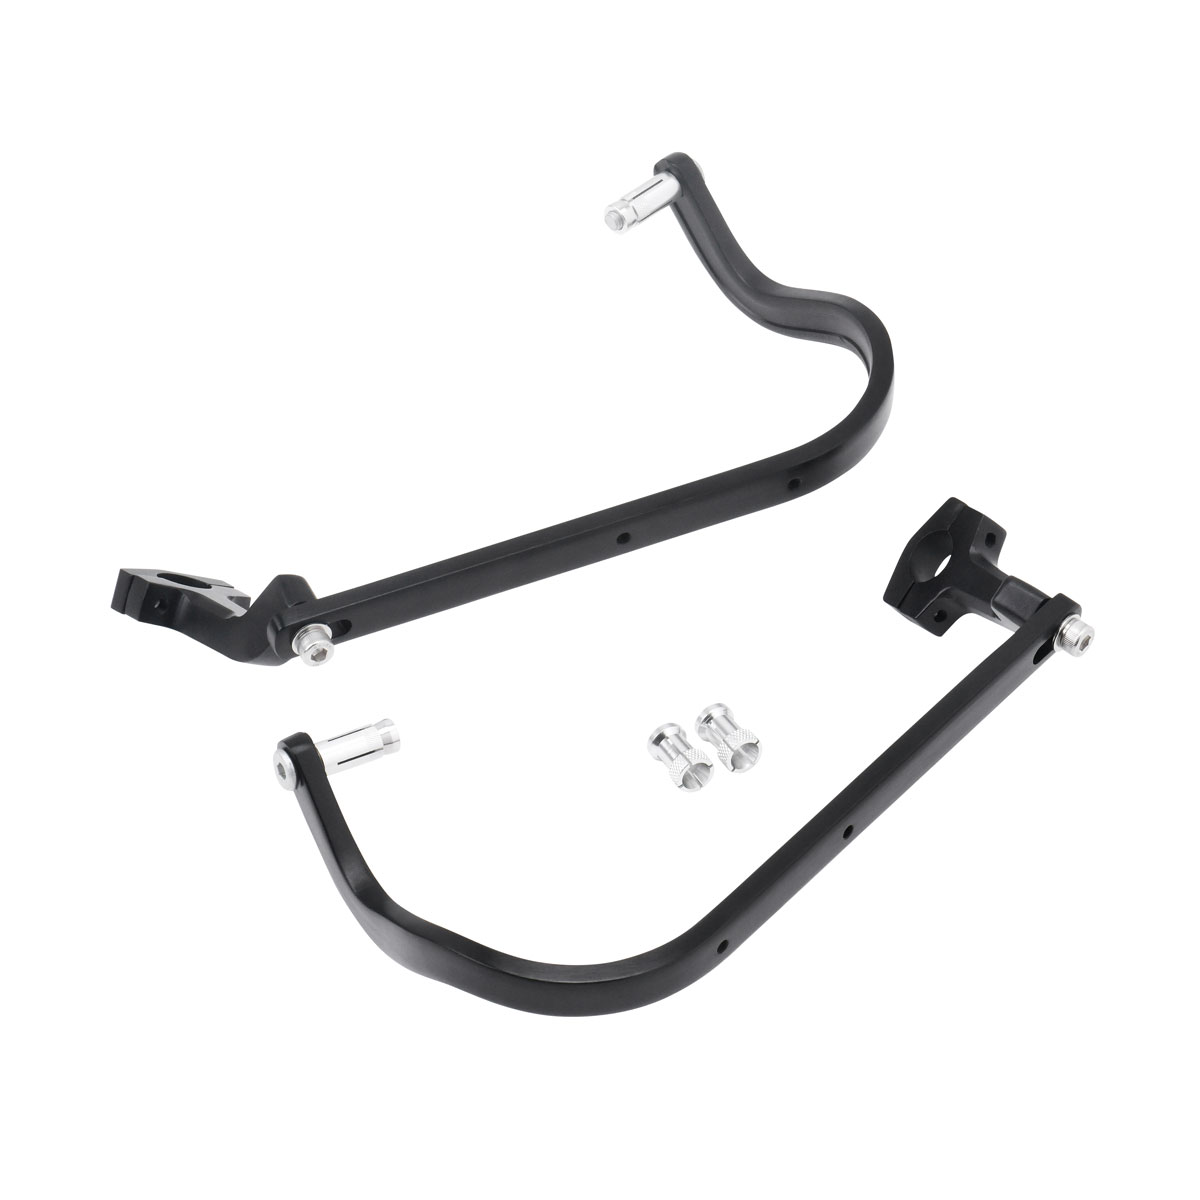 ARMOR HAND GUARD BEND 4ST MINI125 for 22.2mm BAR